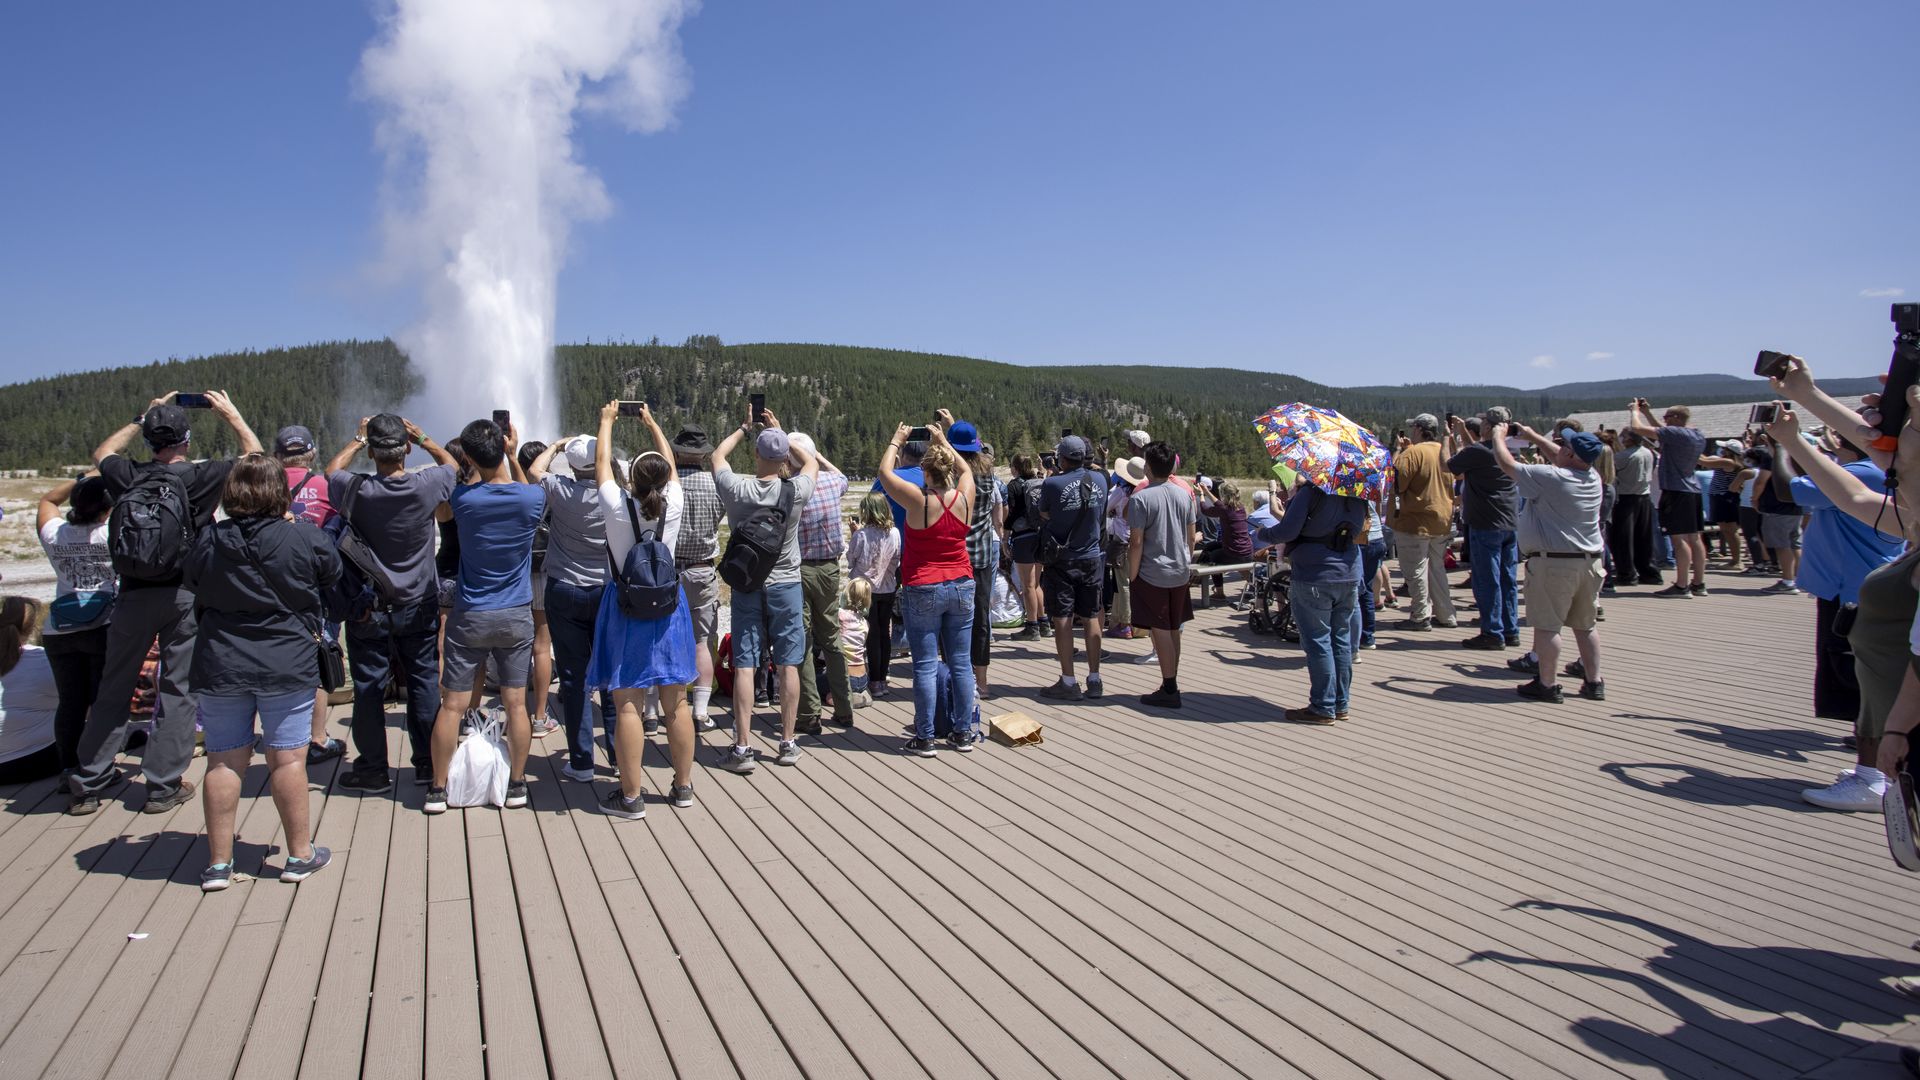 Hundreds of tourists gather on a boardwalk to watch Old Faithful Geyser erupt on on July 14, 2021 at Yellowstone National Park, Wyoming. (Natalie Behring/Getty Images)